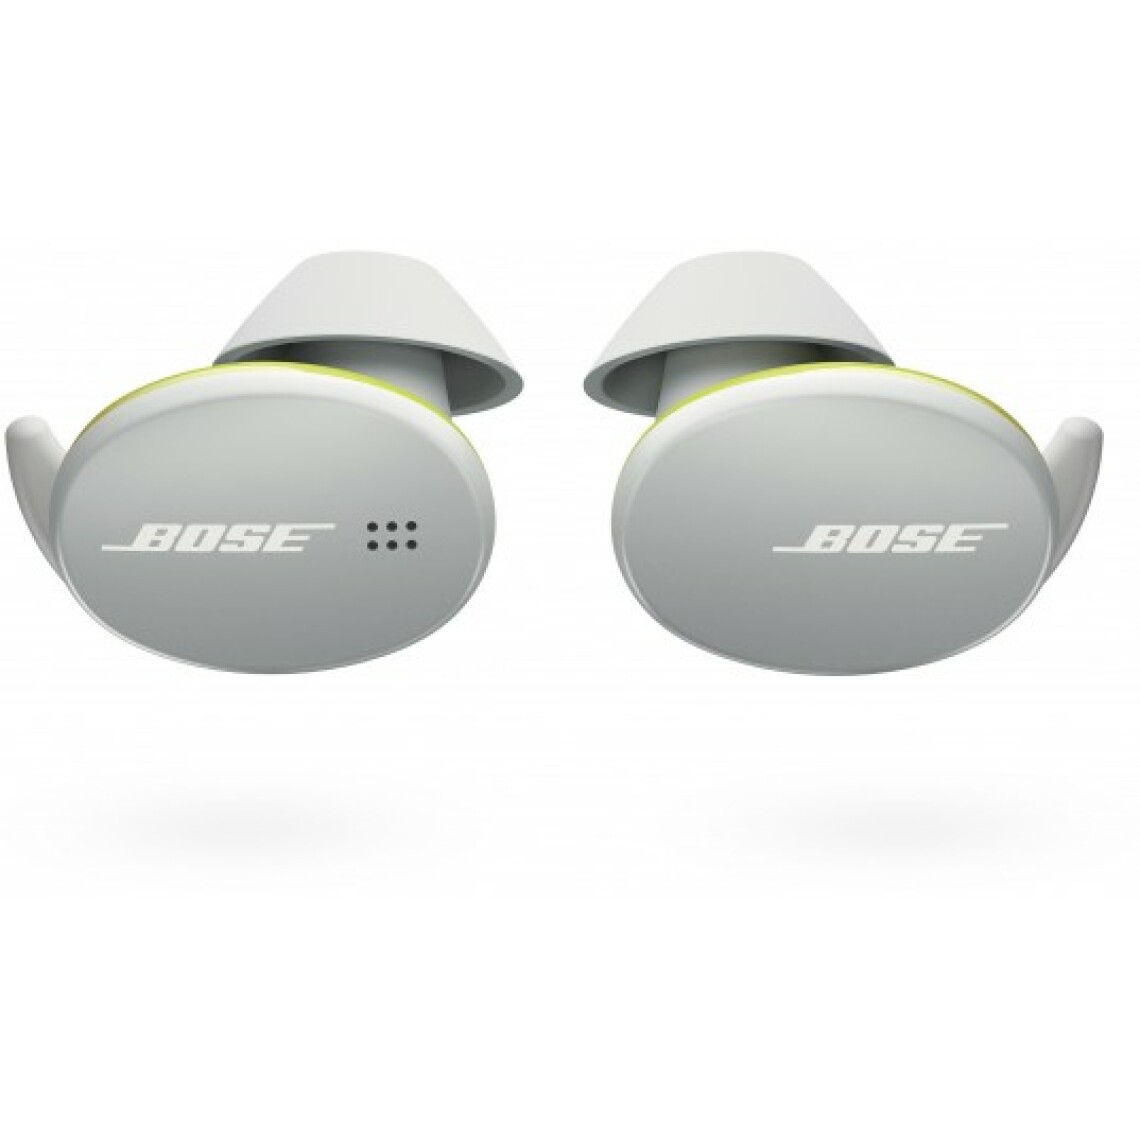 Bose - Ecouteurs True Wireless BOSE SPORT EARBUDS GLACIER WHITE - Ecouteurs intra-auriculaires